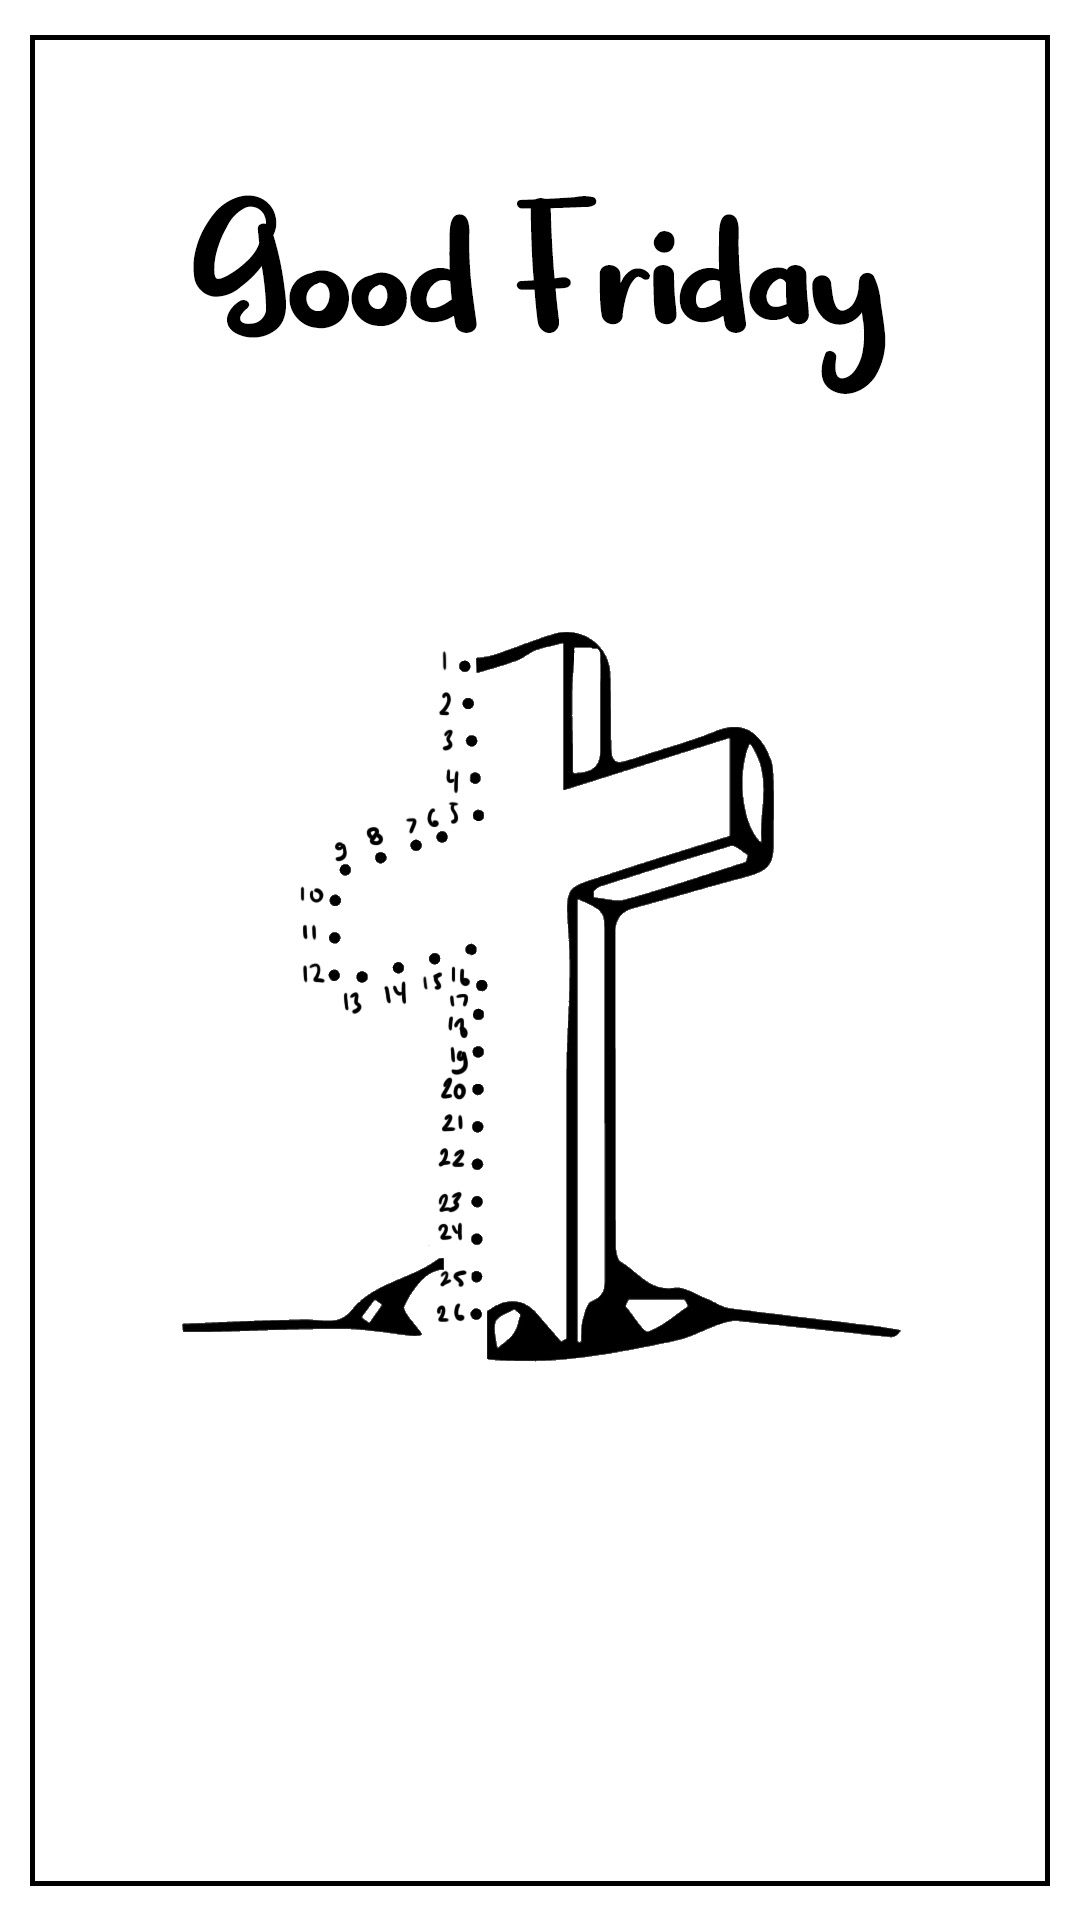 12-best-images-of-jesus-connect-the-dots-worksheets-easter-jesus